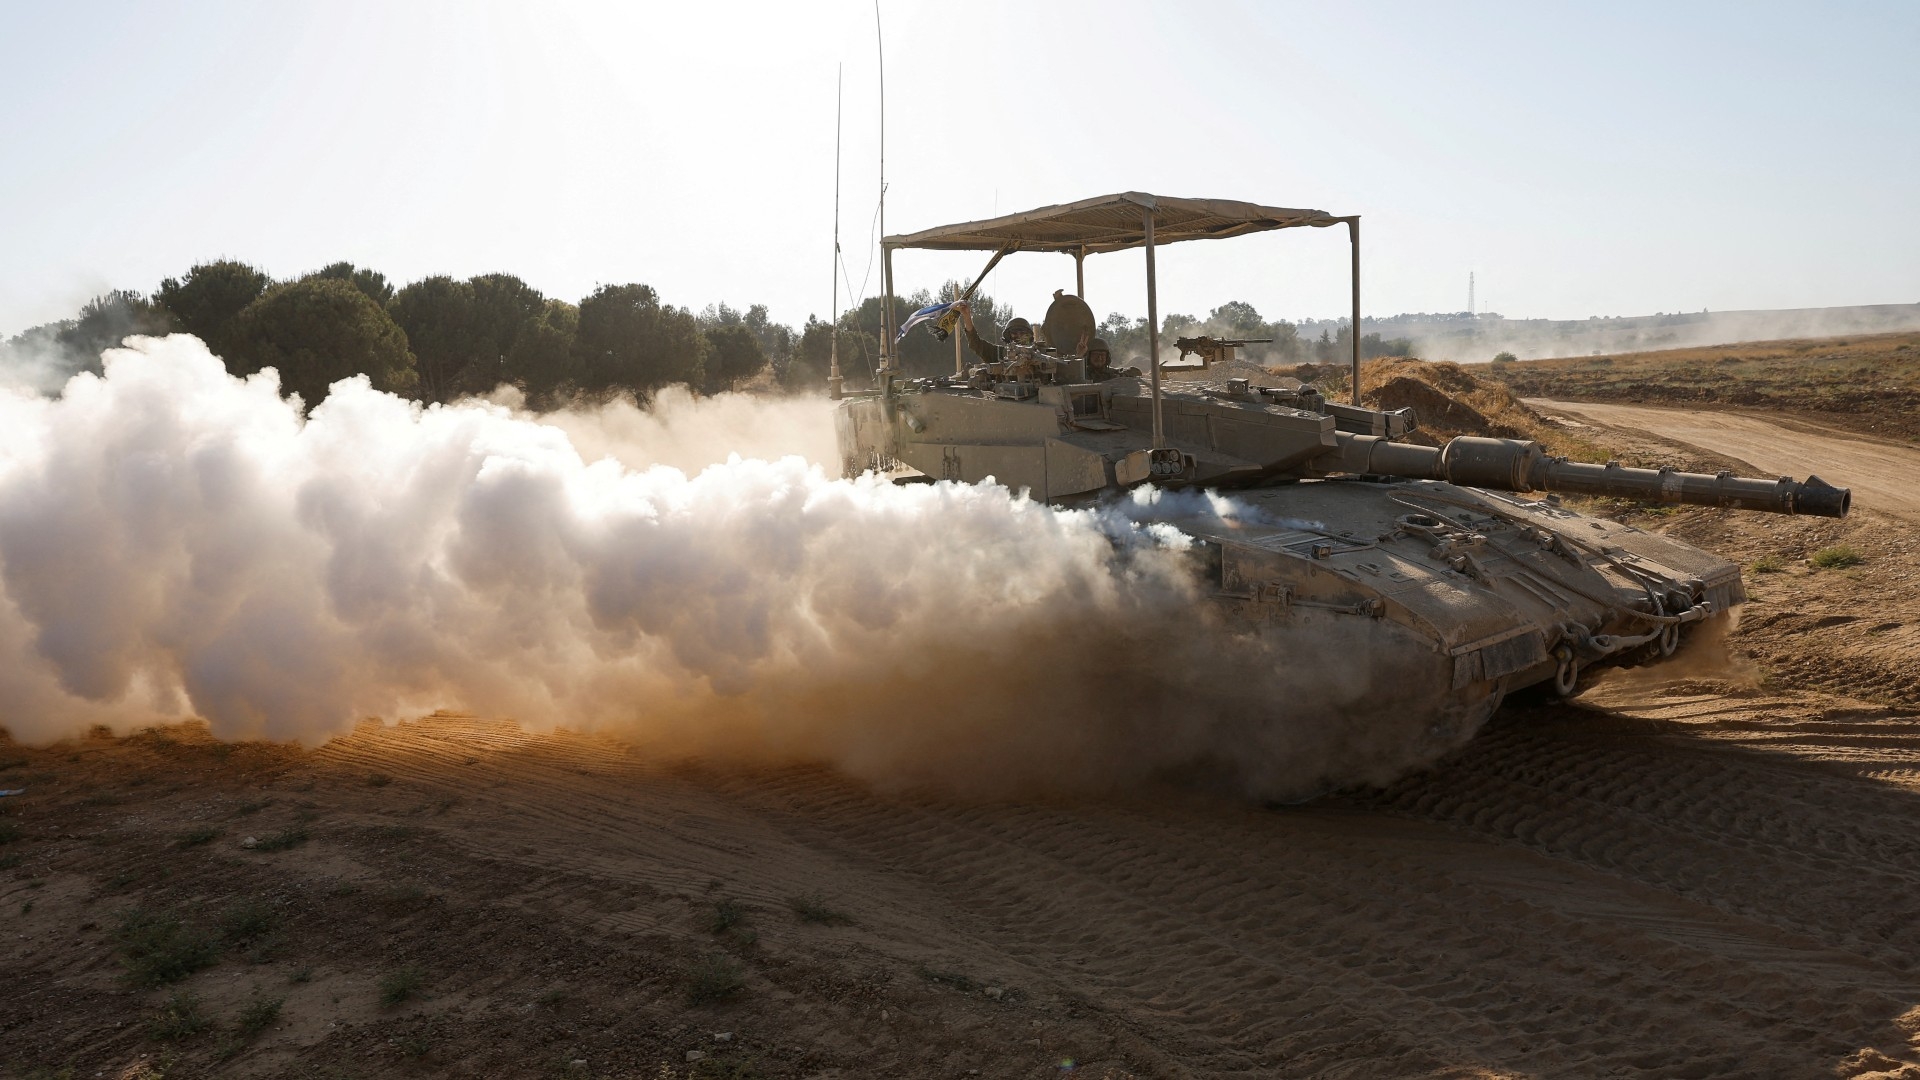 An Israeli tank manoeuvres, after returning from the Gaza Strip, in Israel, 5 June (Reuters/Amir Cohen)